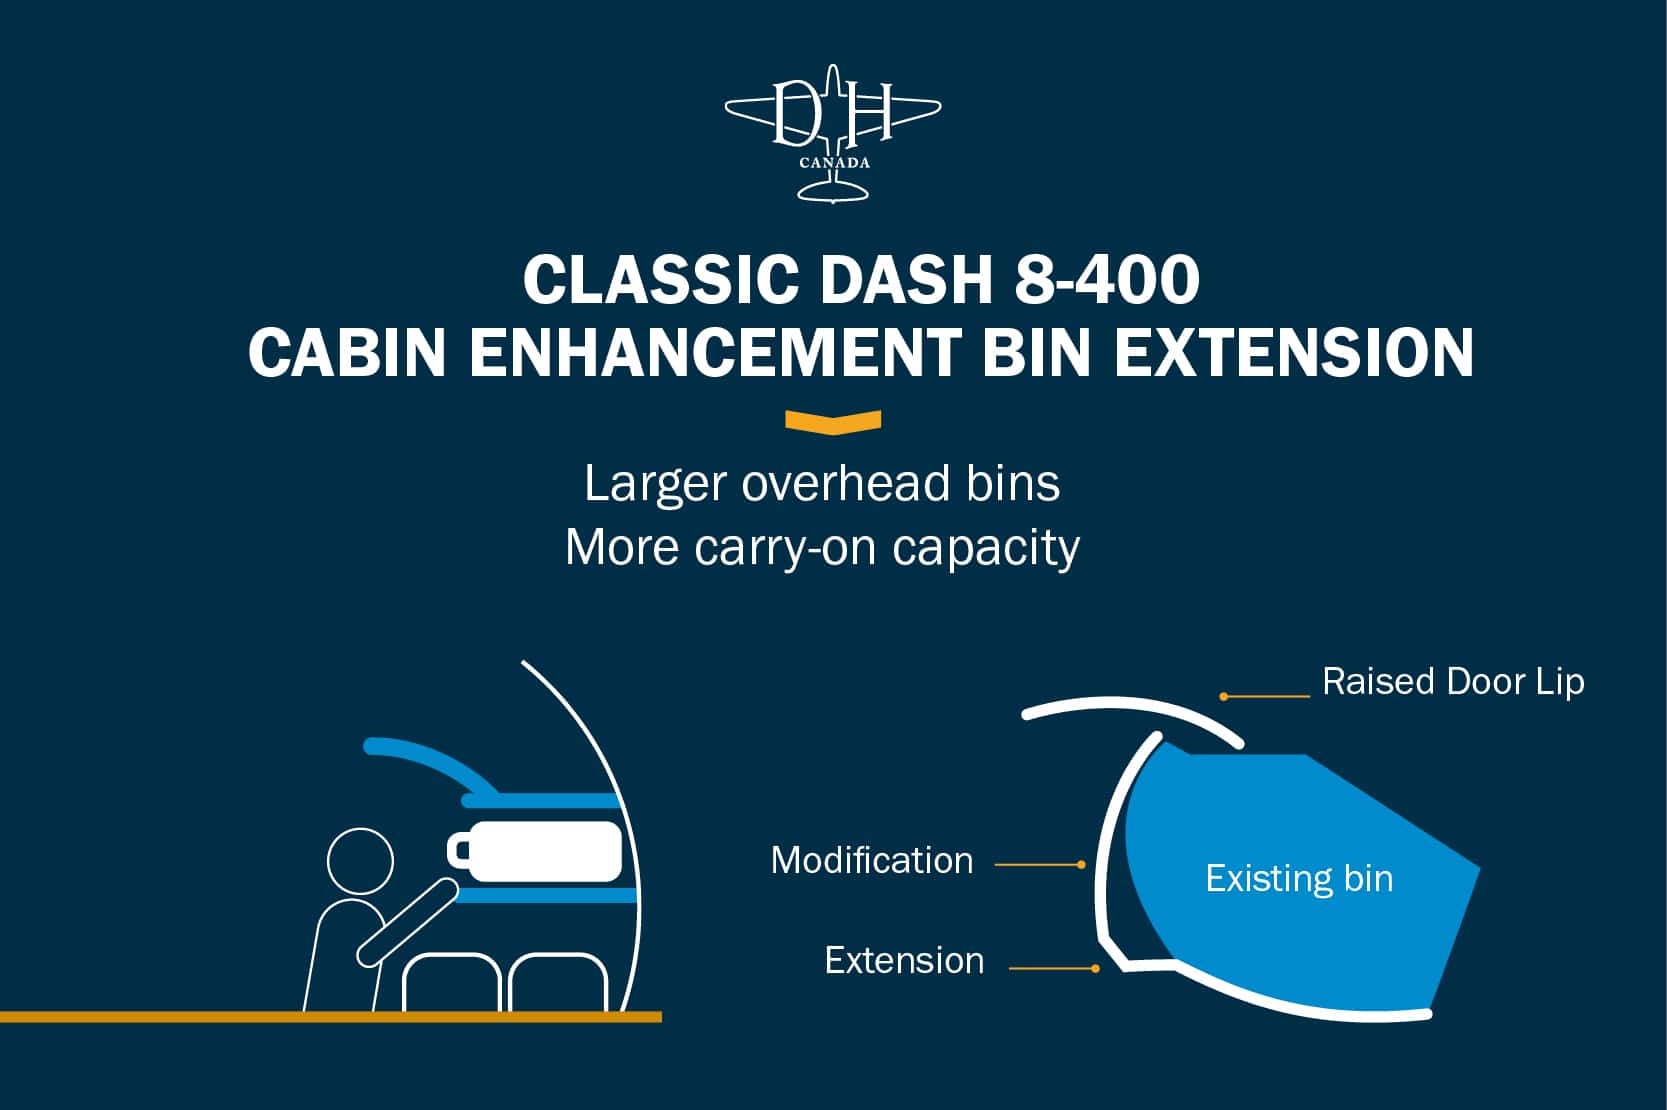 Nordic Aviation will be the launch customer of De Havilland Canada's Classic Overhead Bin Extension Solution for the Dash 8-400 b